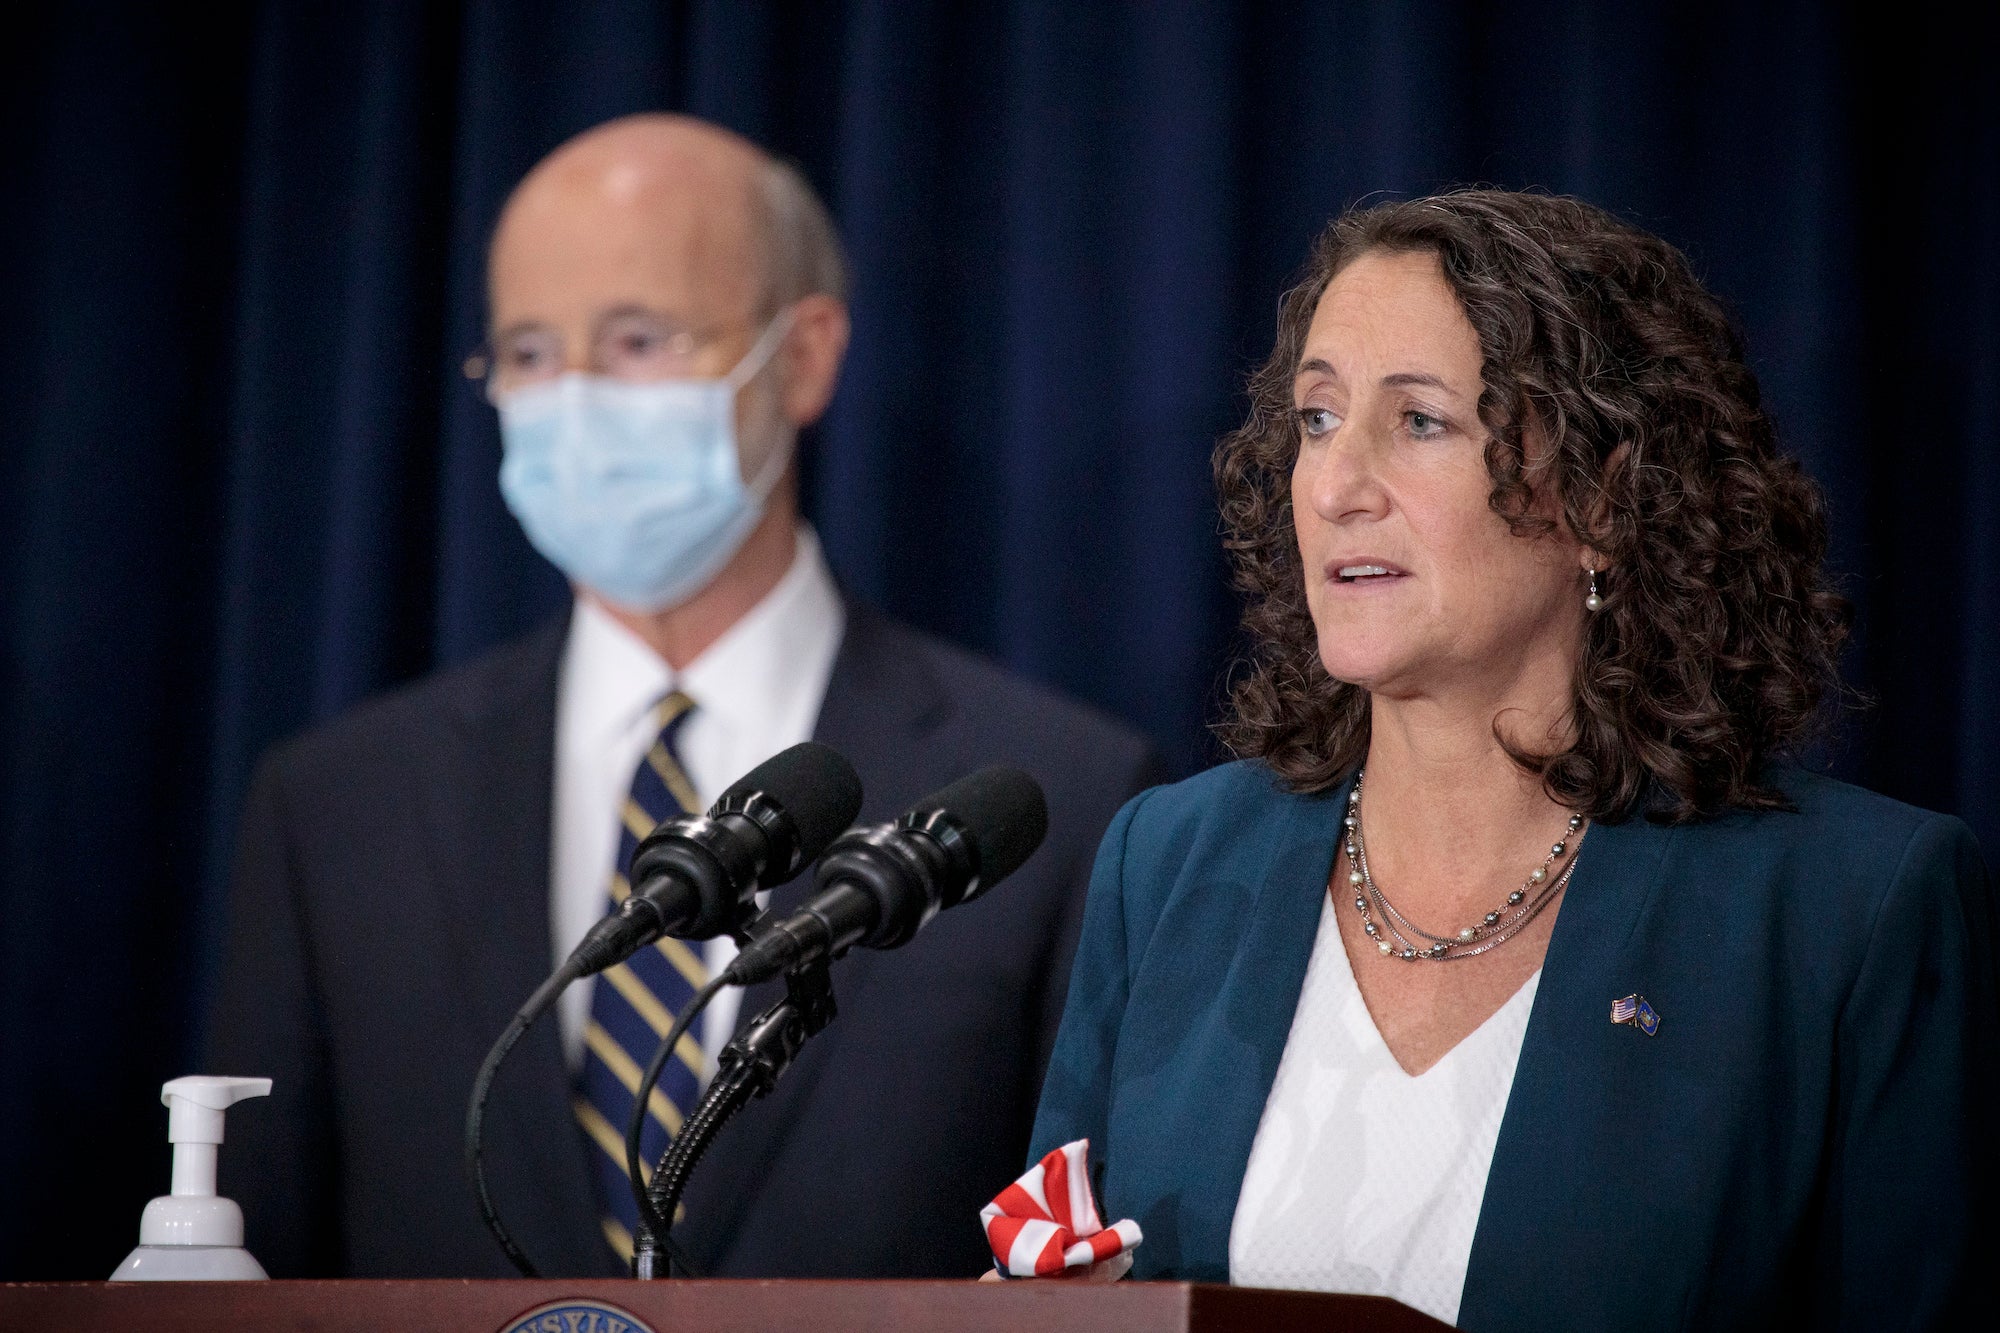 Secretary of State Kathy Boockvar (right) and Gov. Tom Wolf (left) answer questions from the press in Harrisburg.